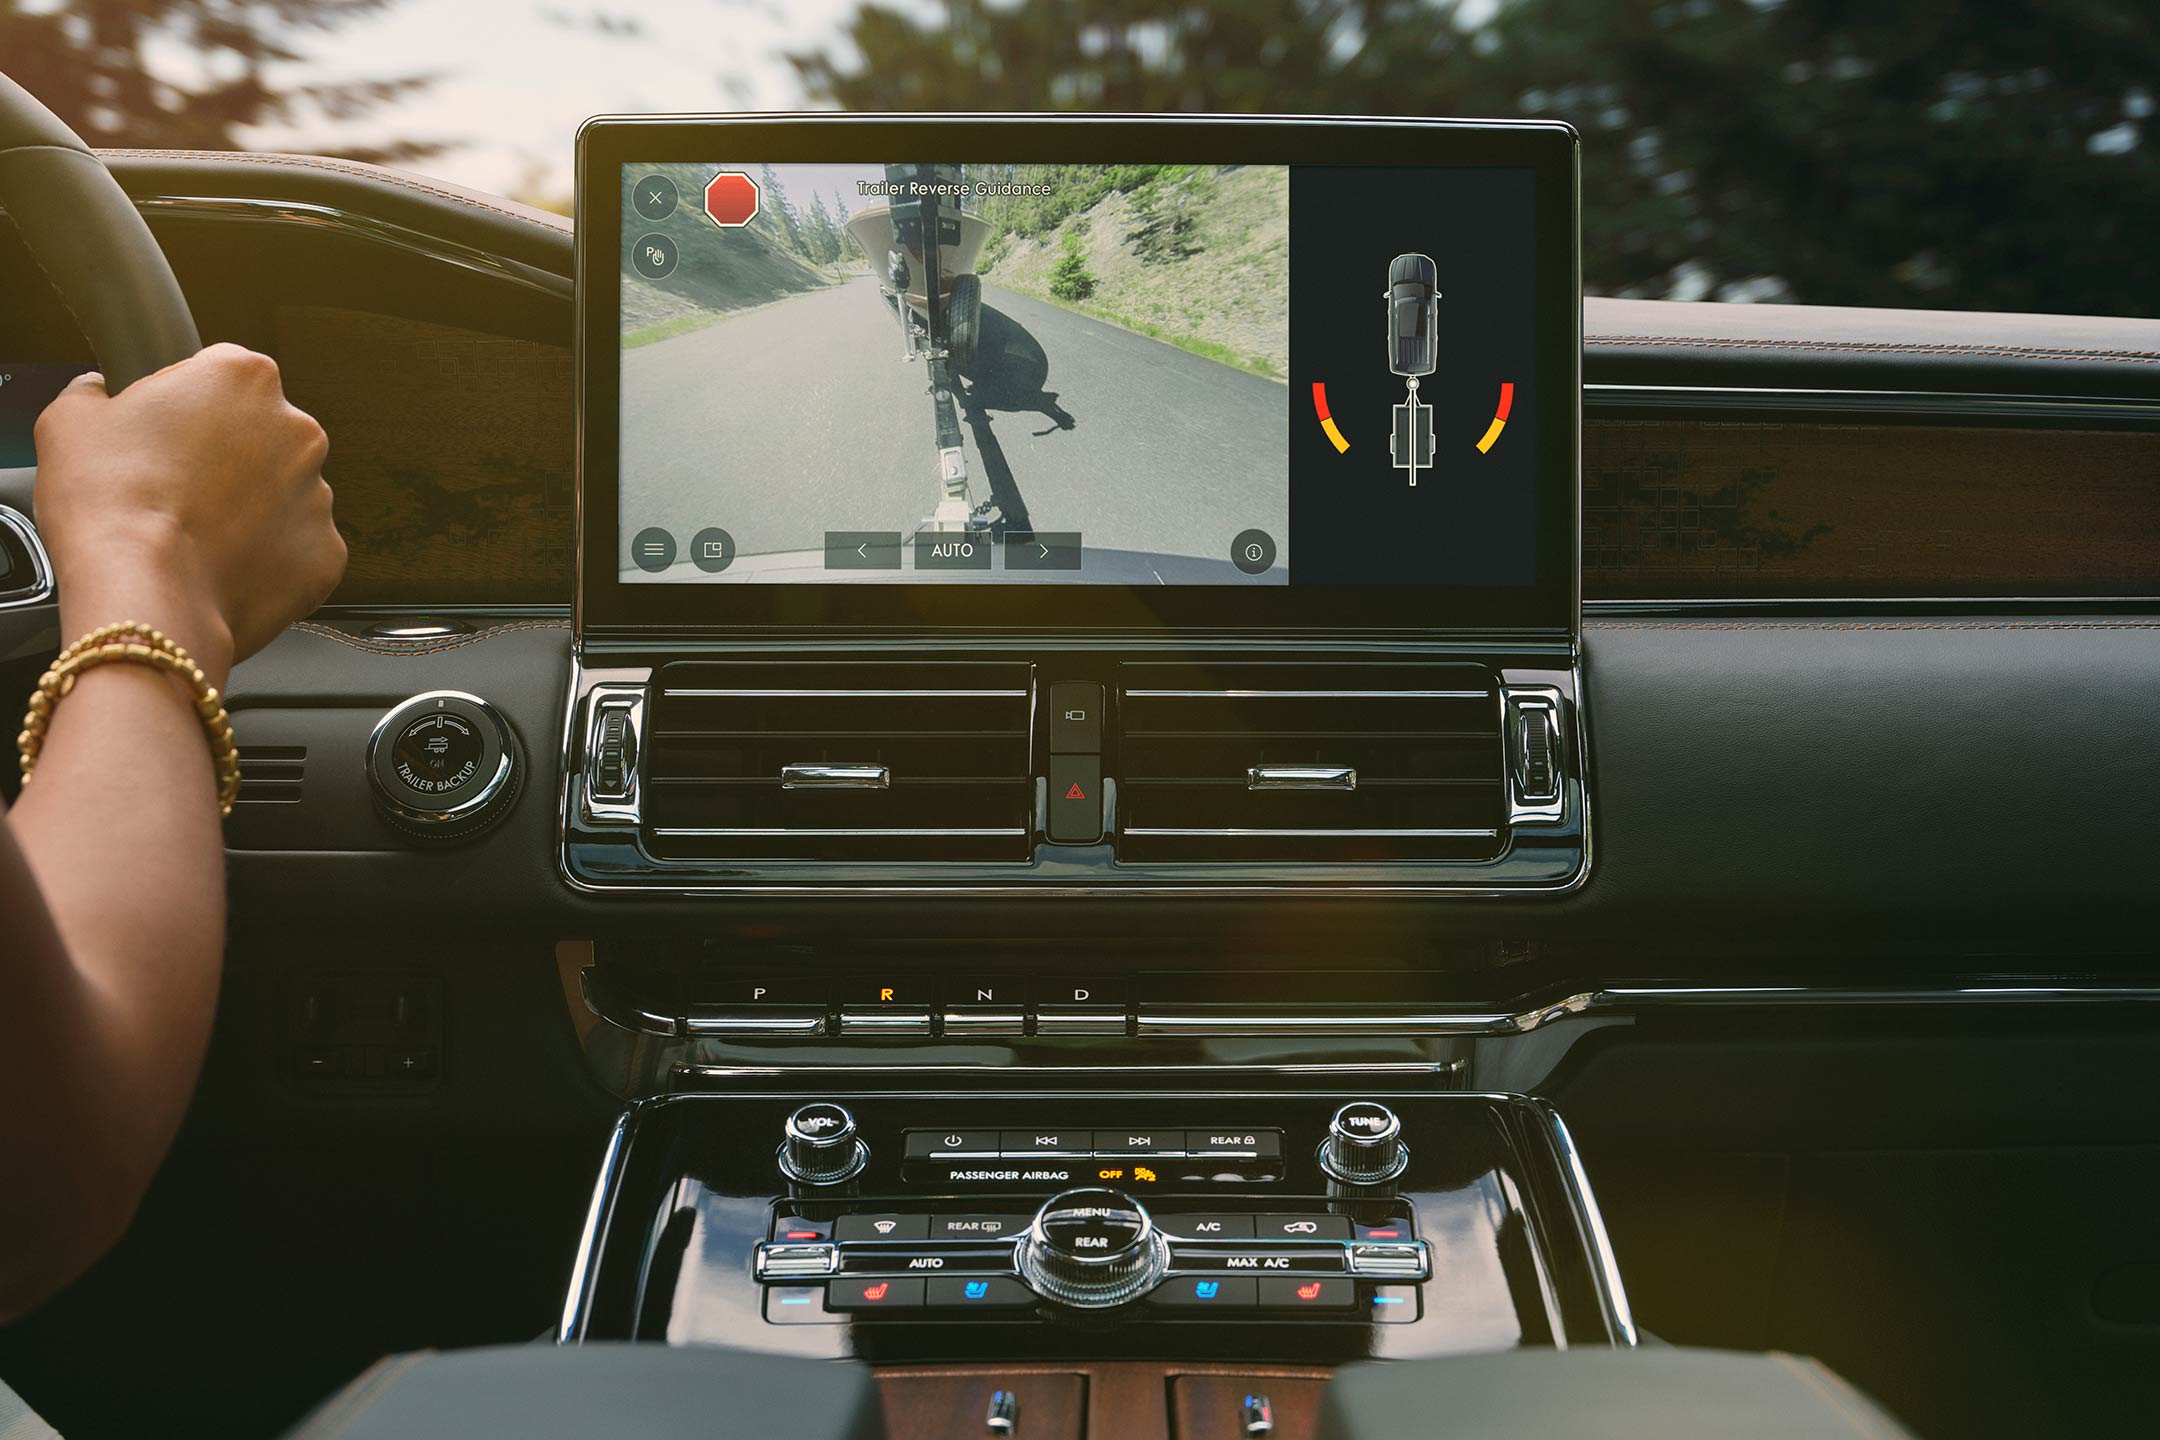 The Trailer Reverse Guidance view is shown on the 13.2-inch LCD center touchscreen.